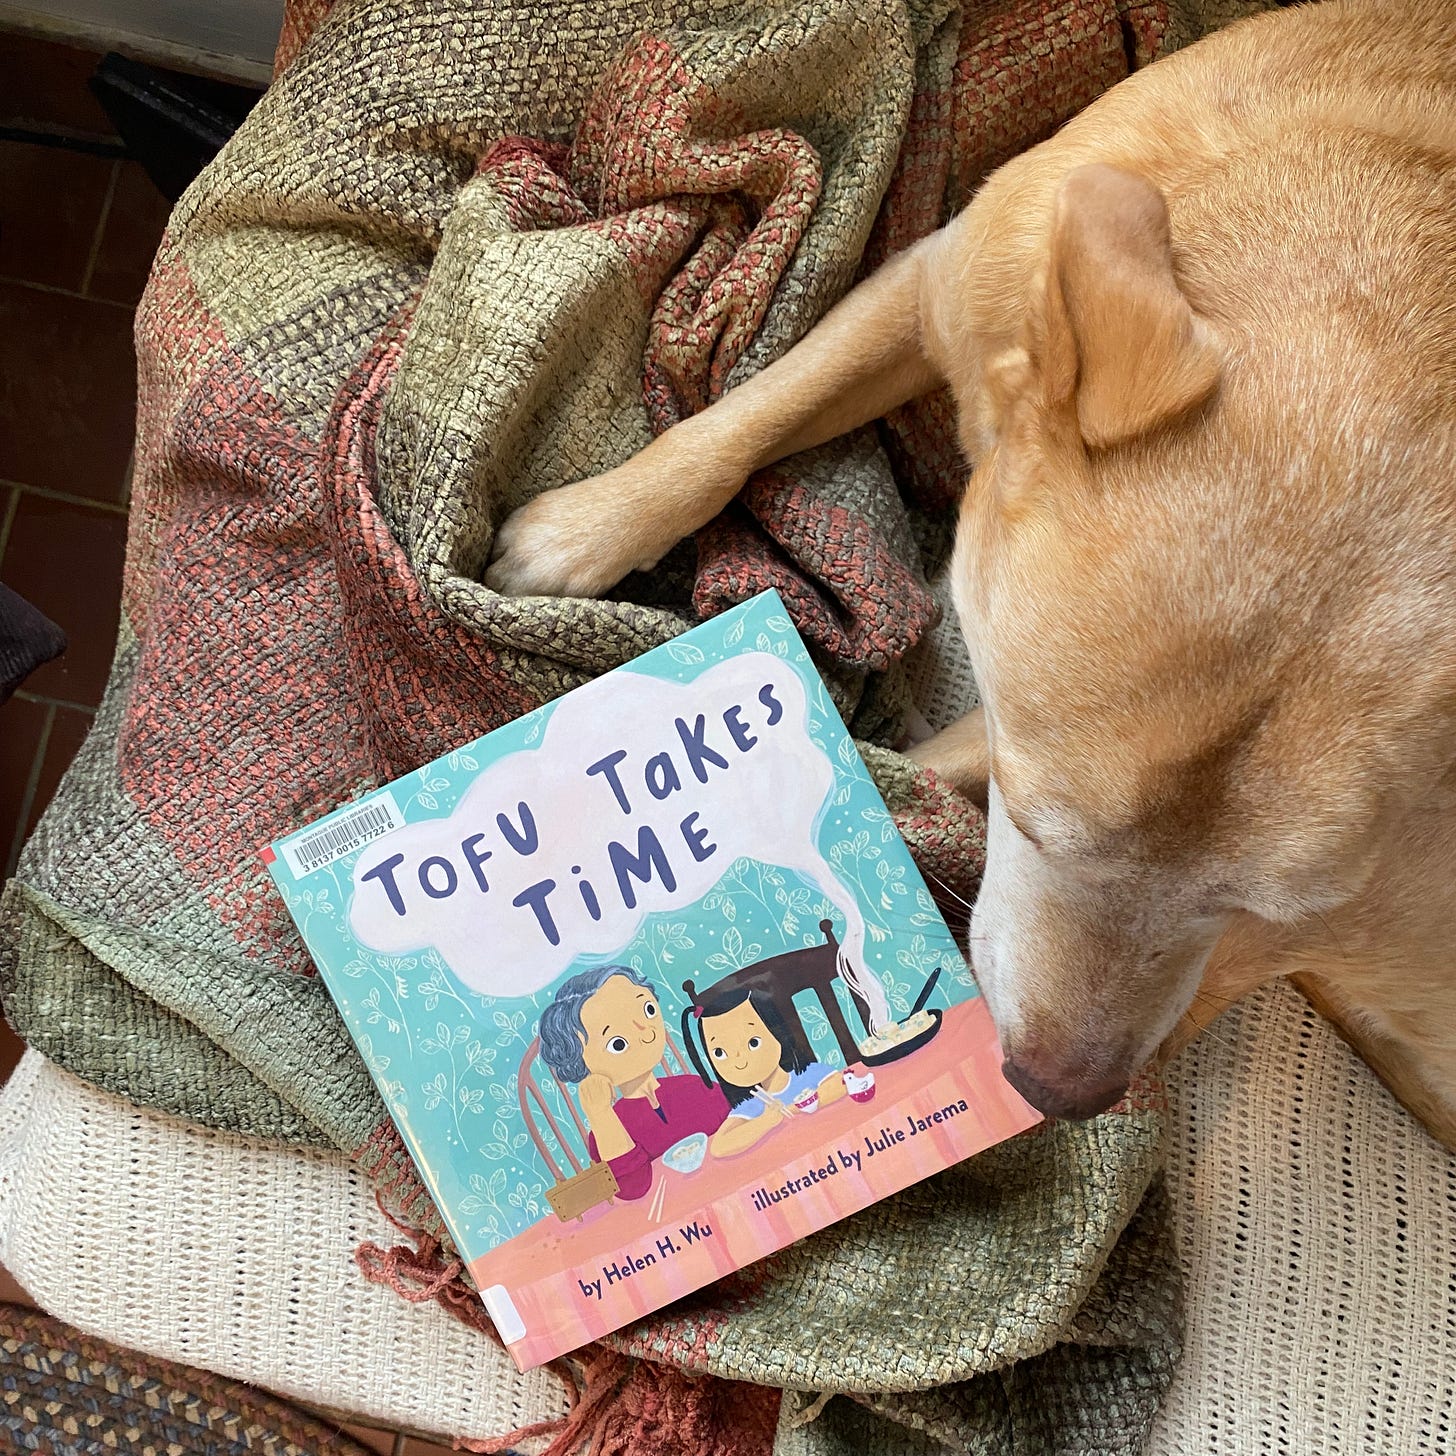 This book lies on a blanket on a couch between my dog’s paws; her nose is partially covering the book’s cover.